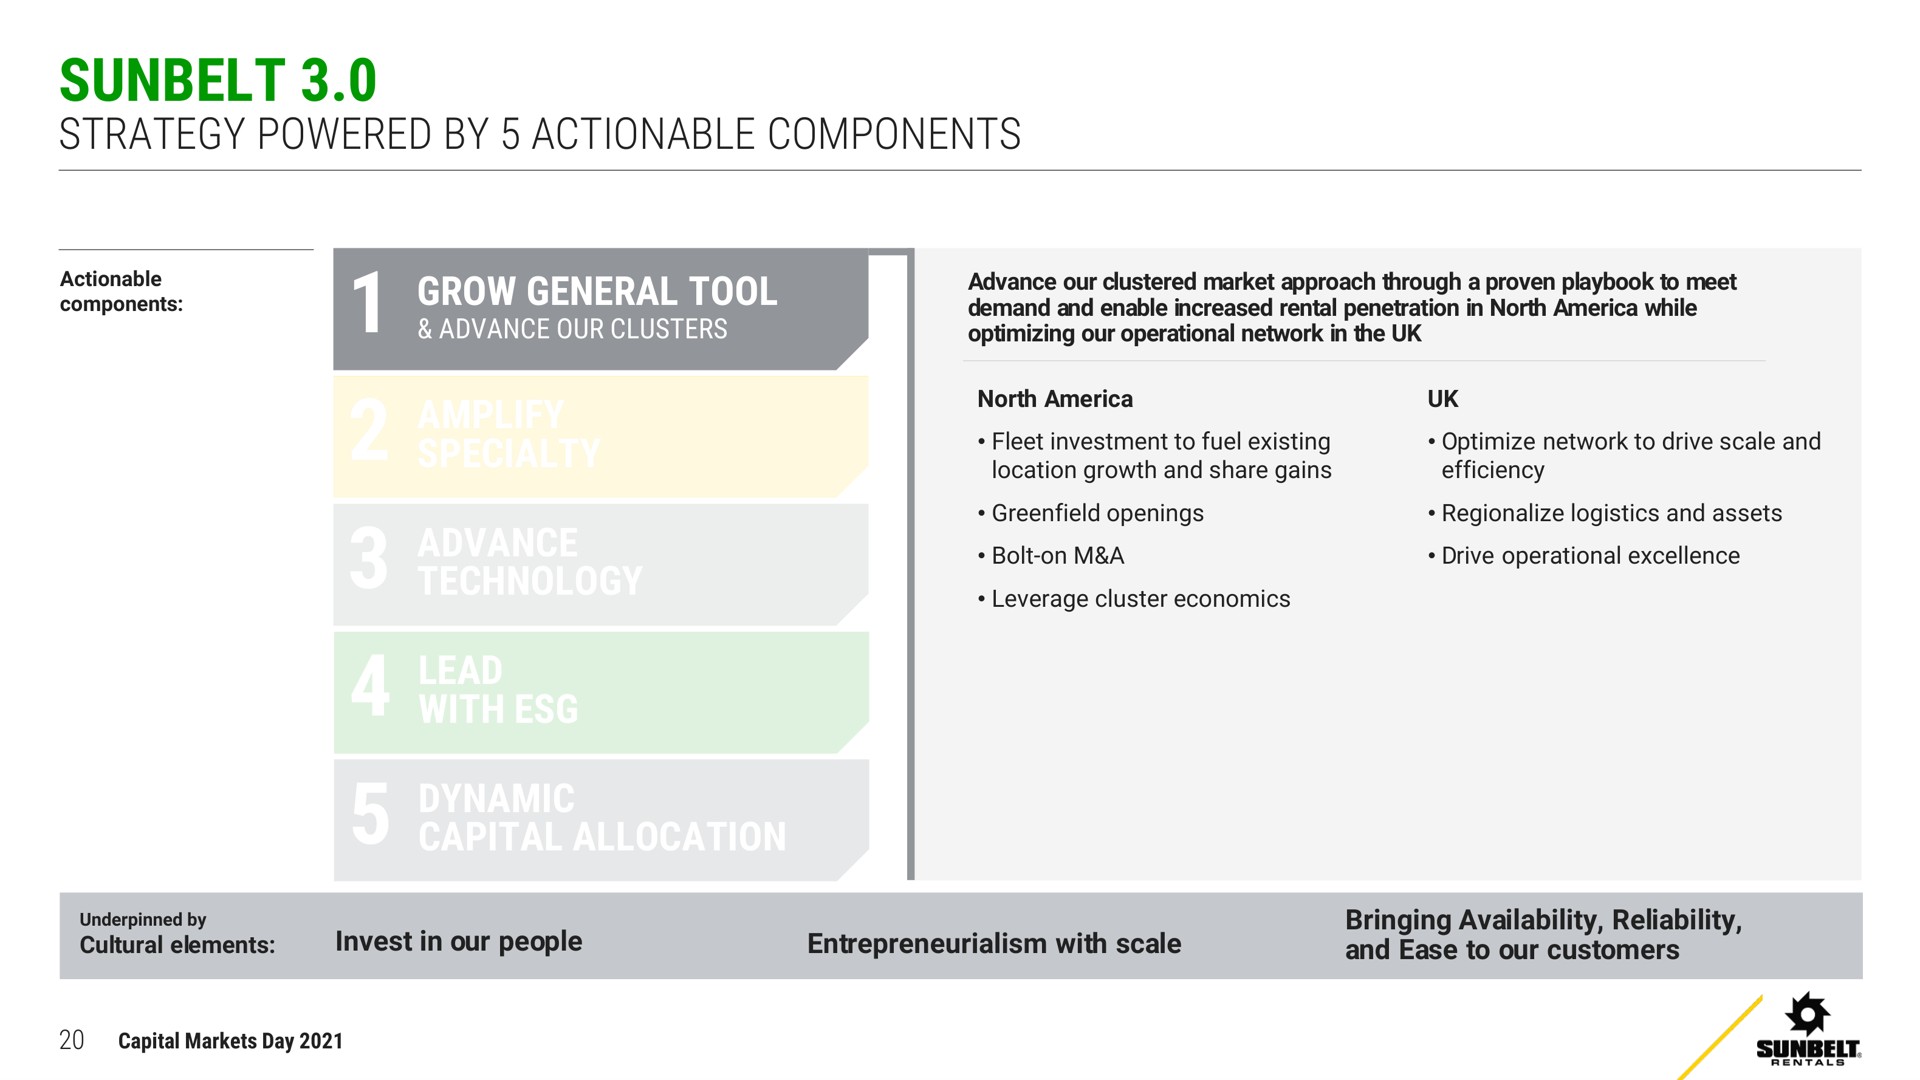 strategy powered by actionable components | Ashtead Group